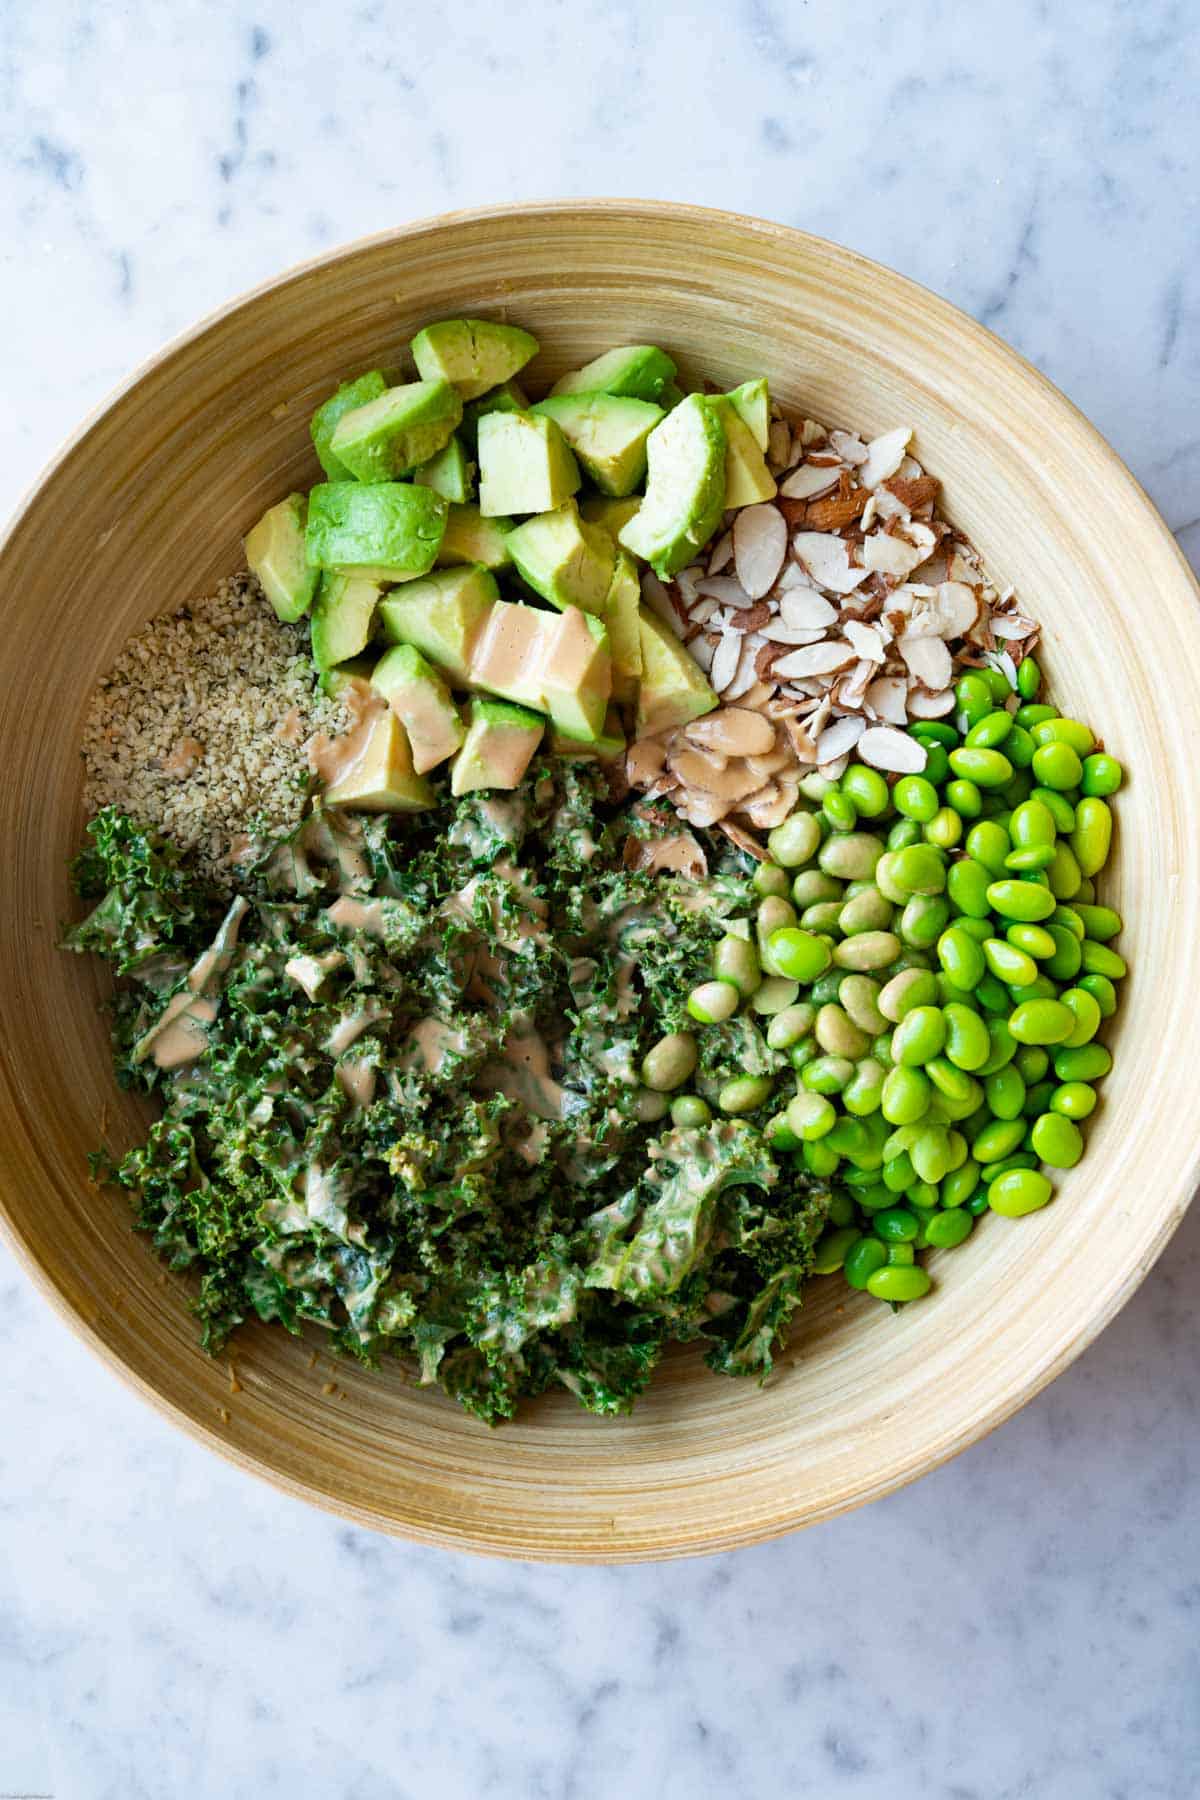 Chopped kale, avocado chunks, slivered almonds, and hemps seeds in a large bamboo bowl, topped with creamy peanut dressing.